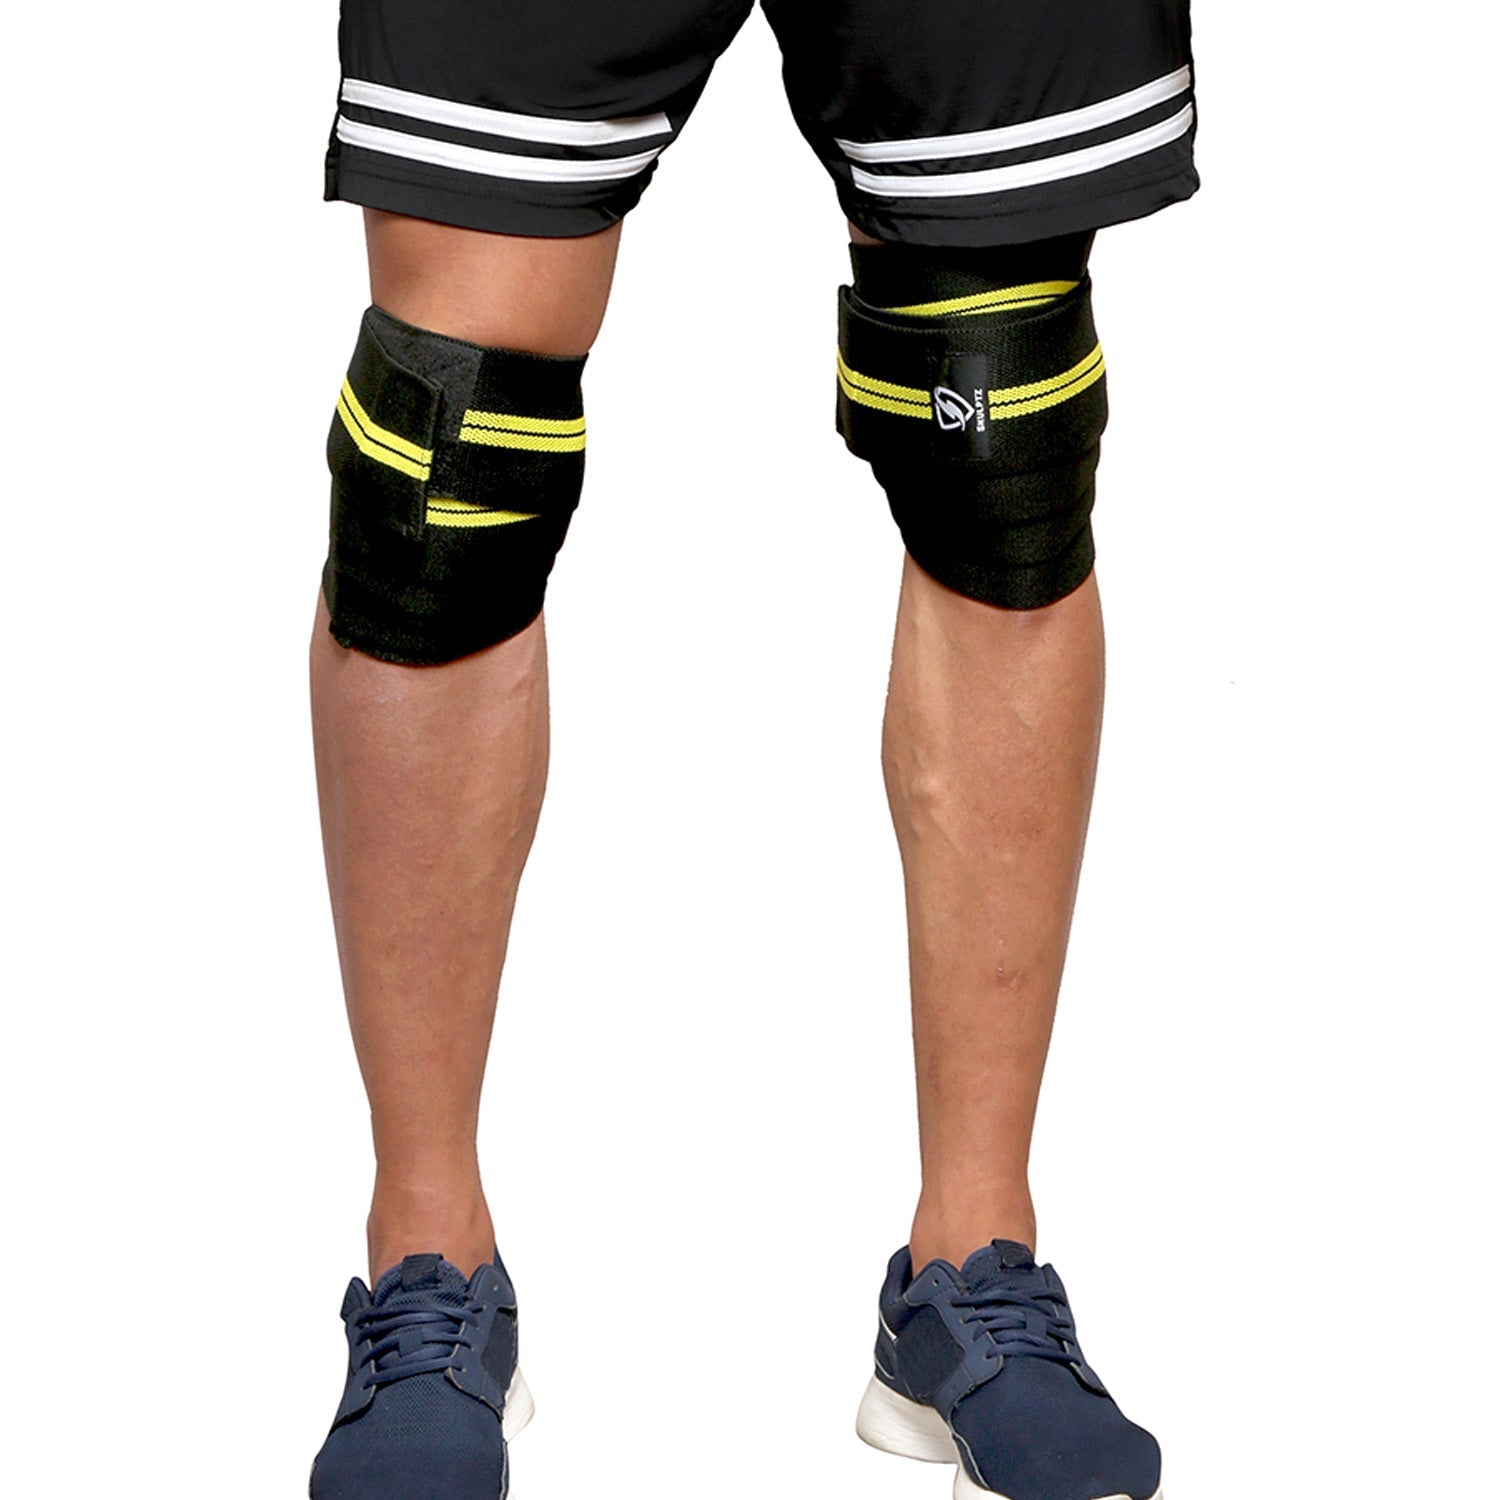 Eclipse Series Competition Grade Knee Support Yellow - skulptz